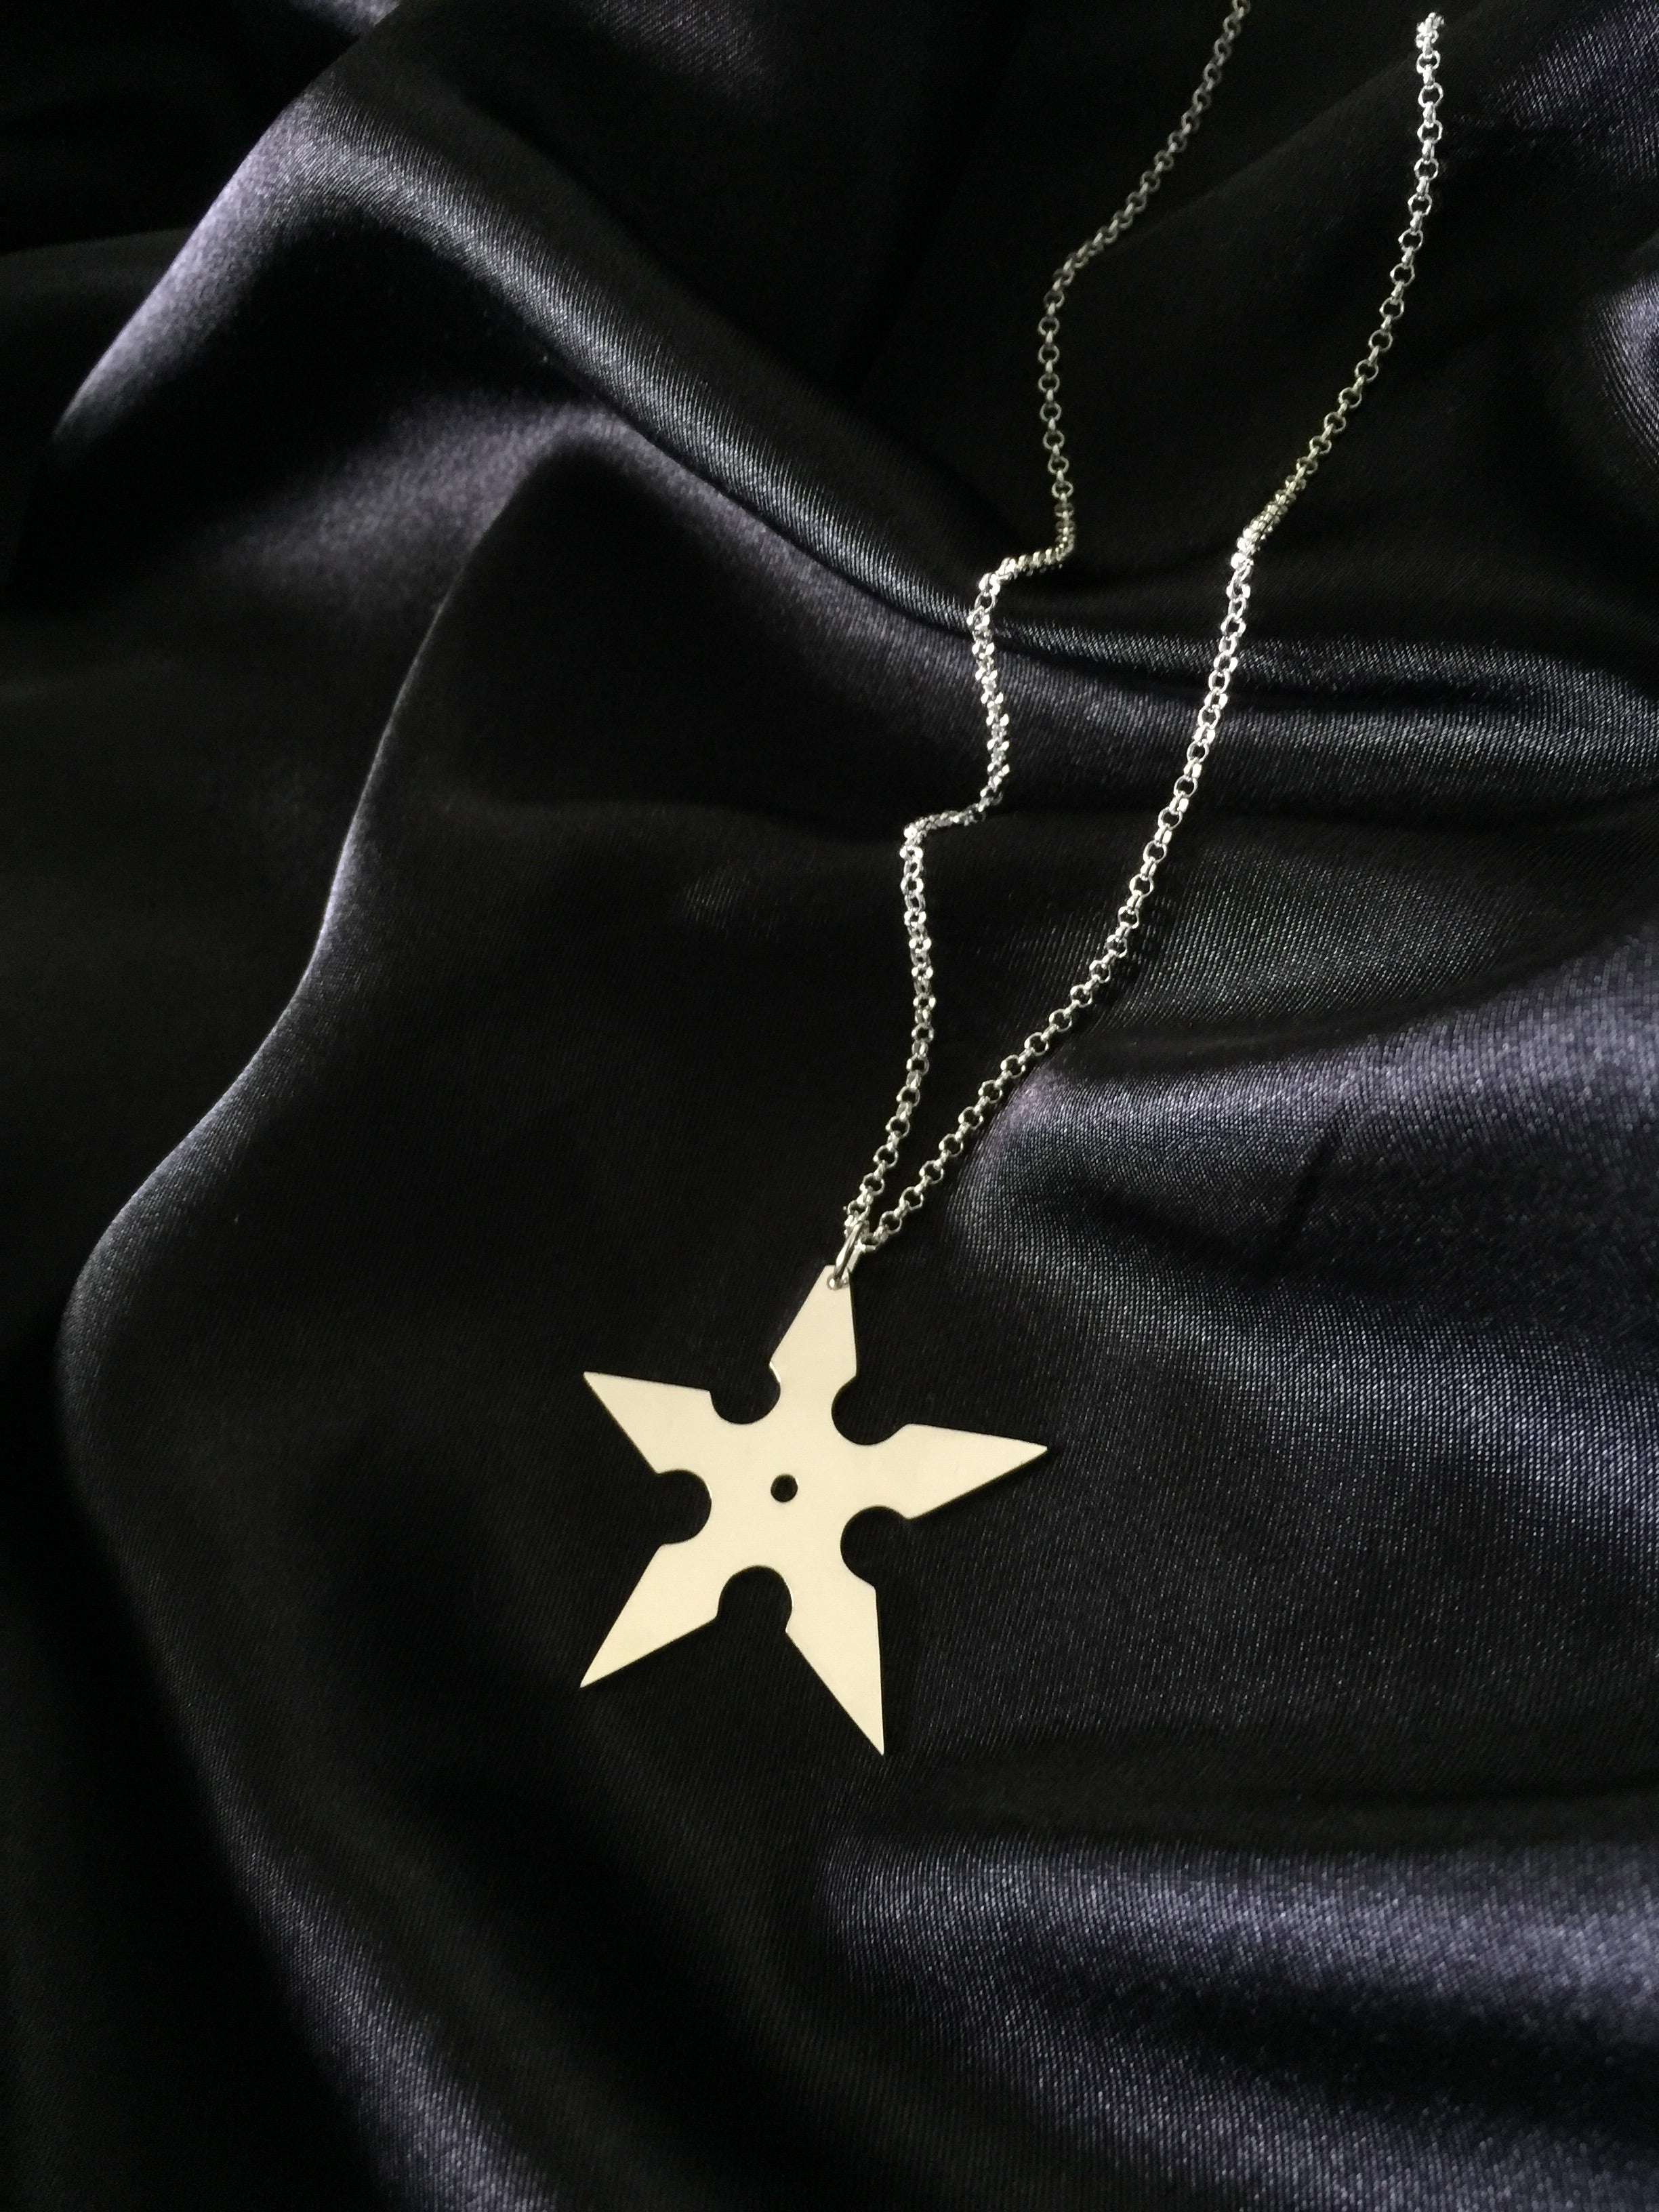 Throwing Star Necklace.